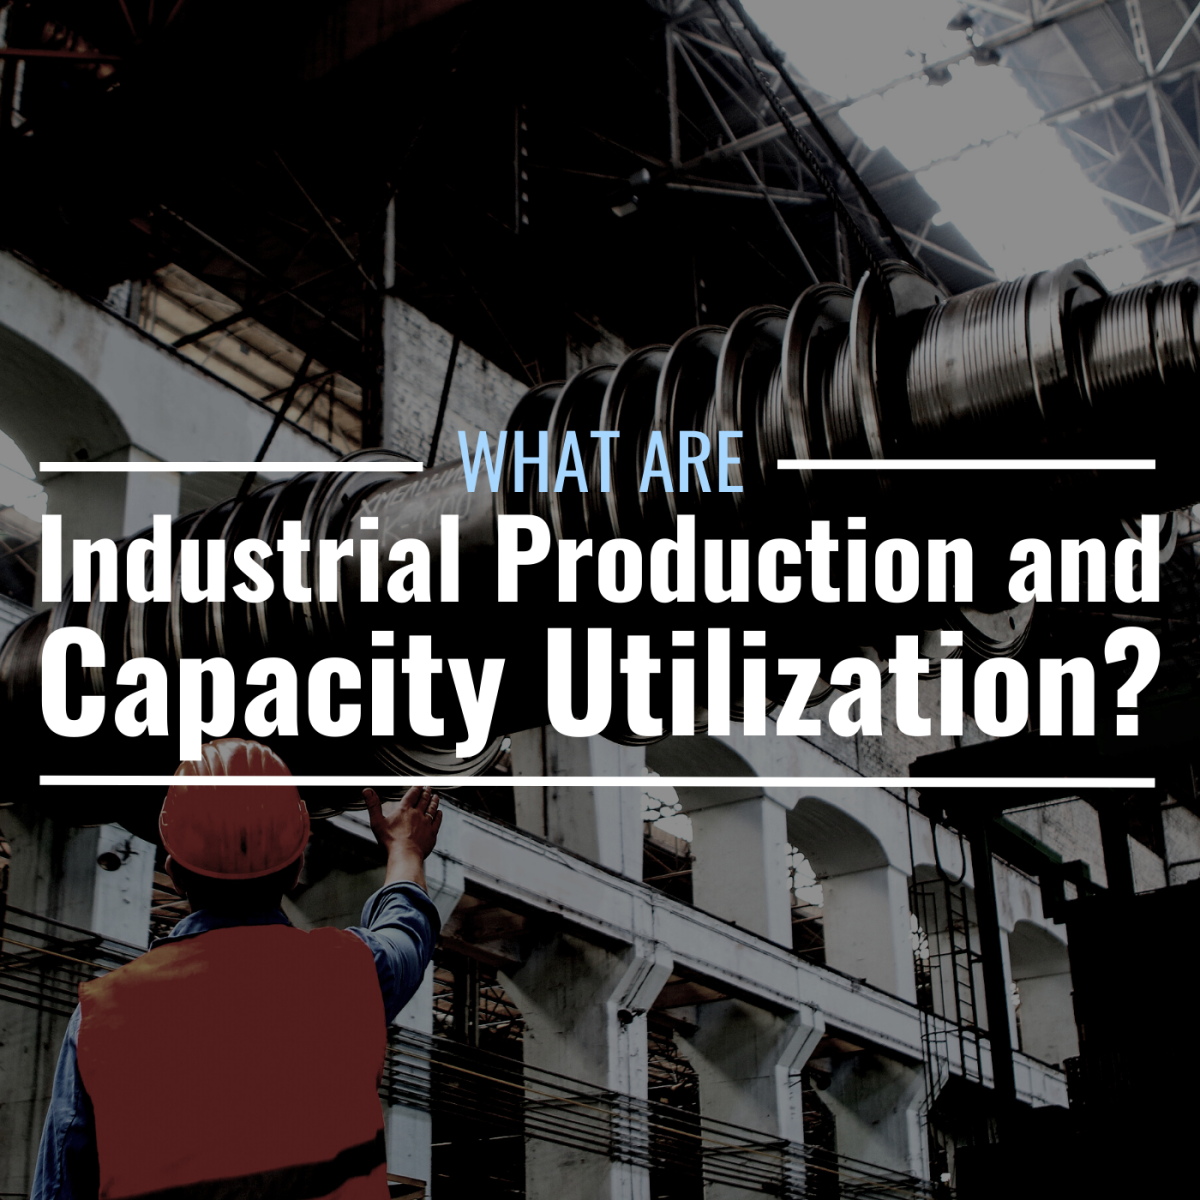 Photo of a worker guiding the placement of machinery equipment at a factory with text overlay that reads "What Are Industrial Production and Capacity Utilization?"